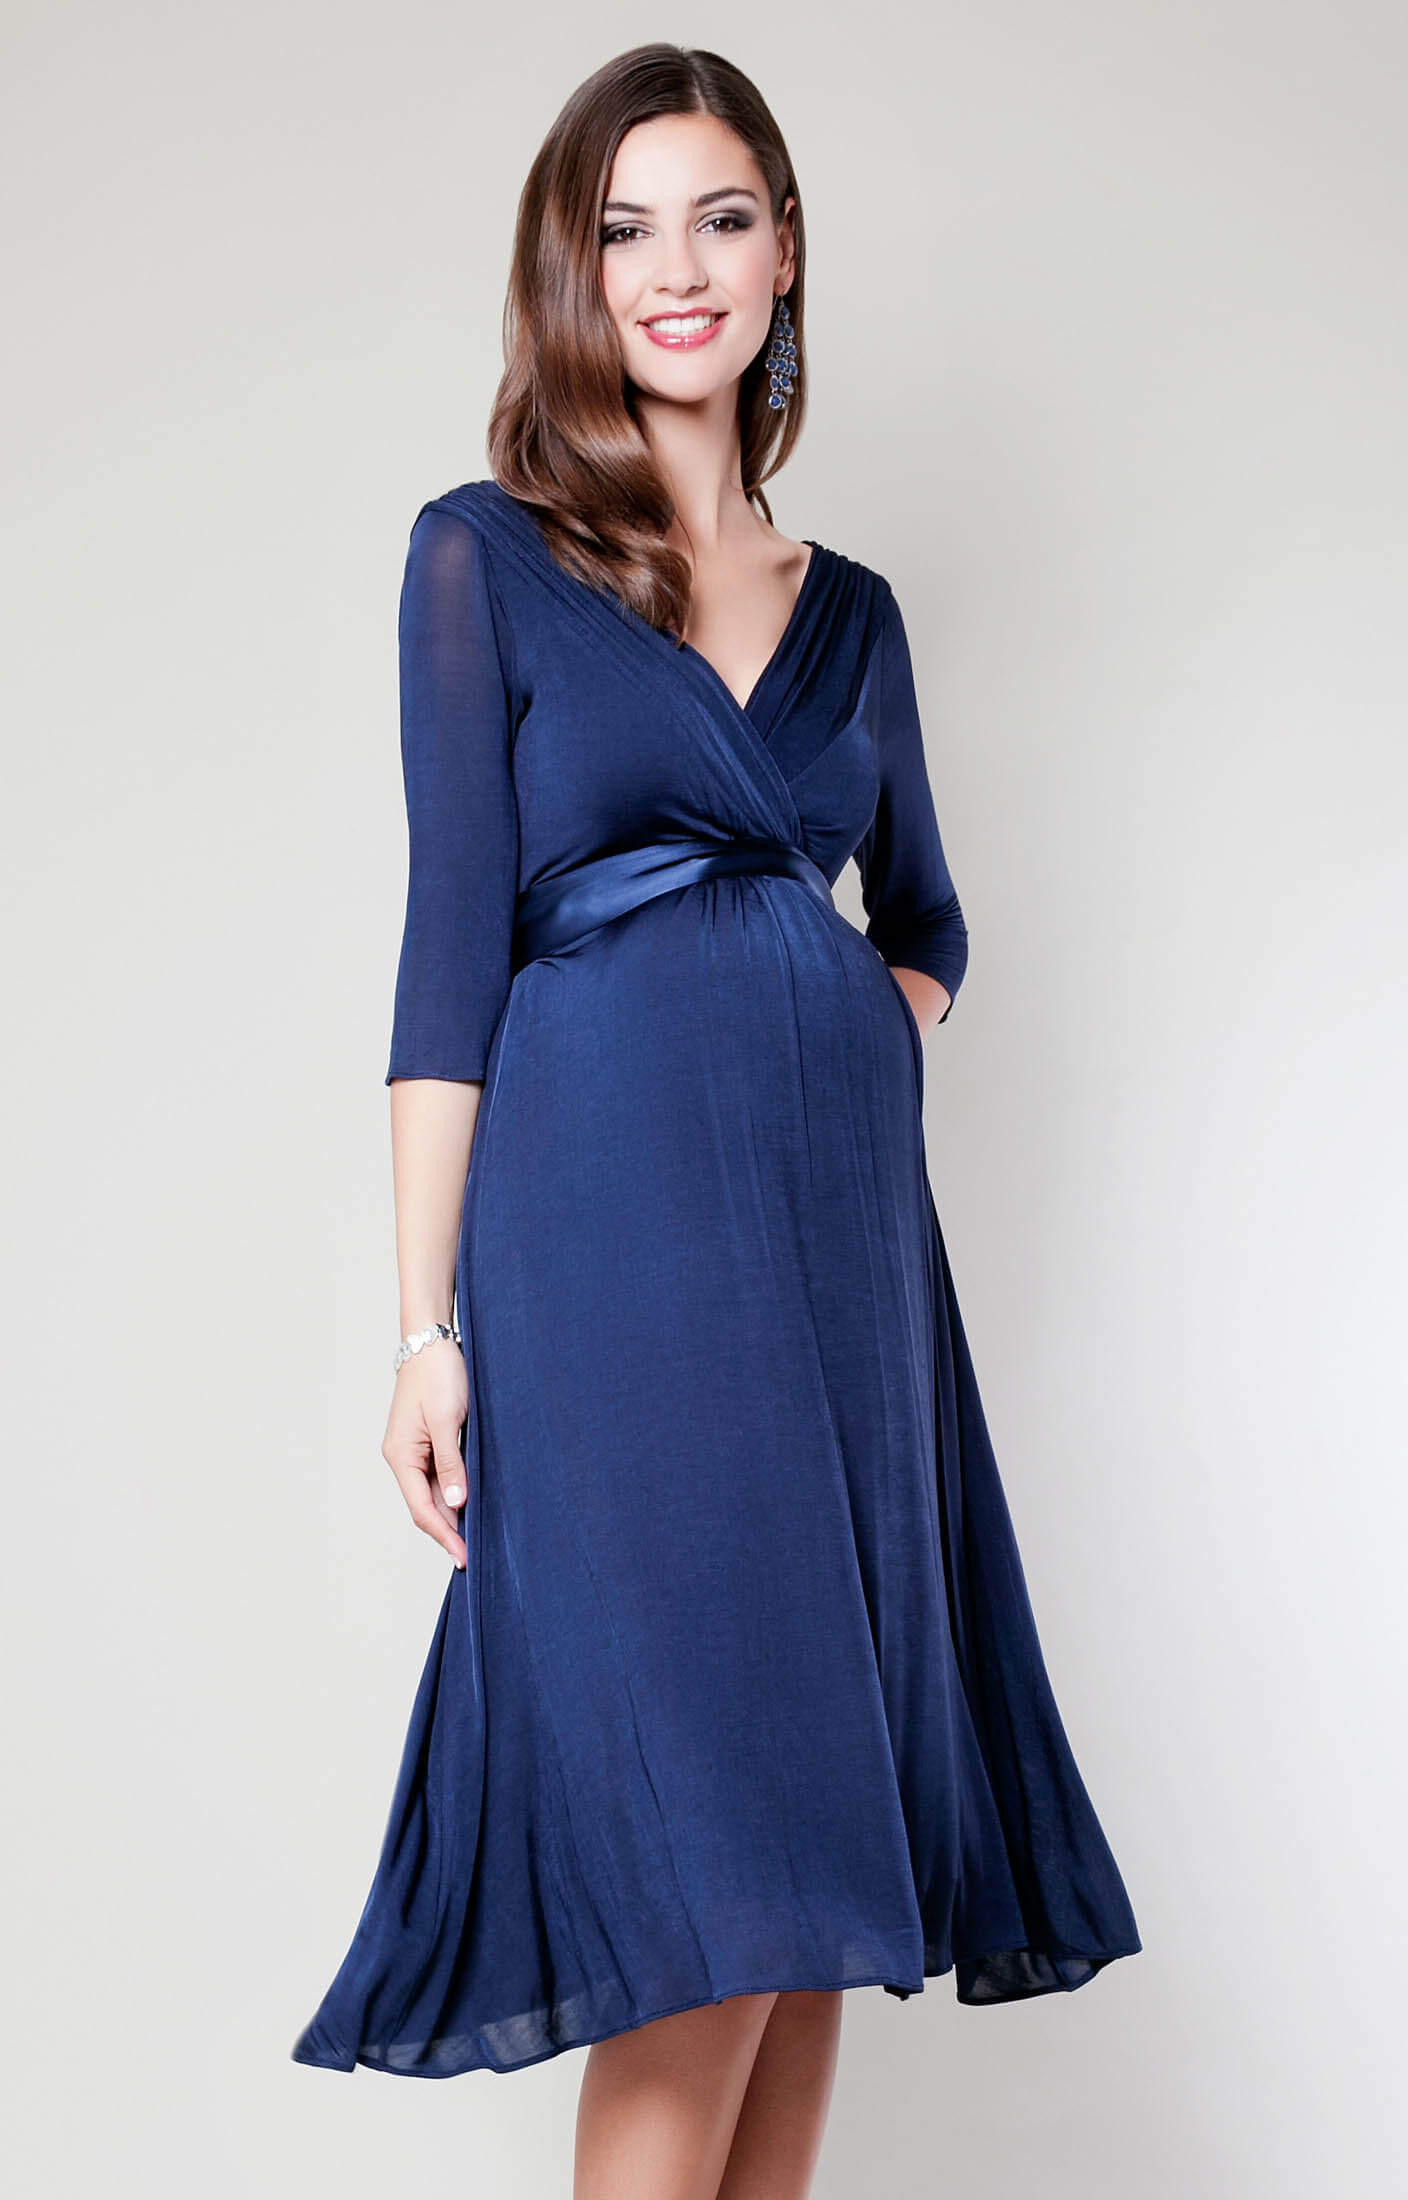 Wear Dress Willow and Blue) Party (Midnight Rose US Clothes Maternity Maternity Dresses, - by Wedding Tiffany Evening